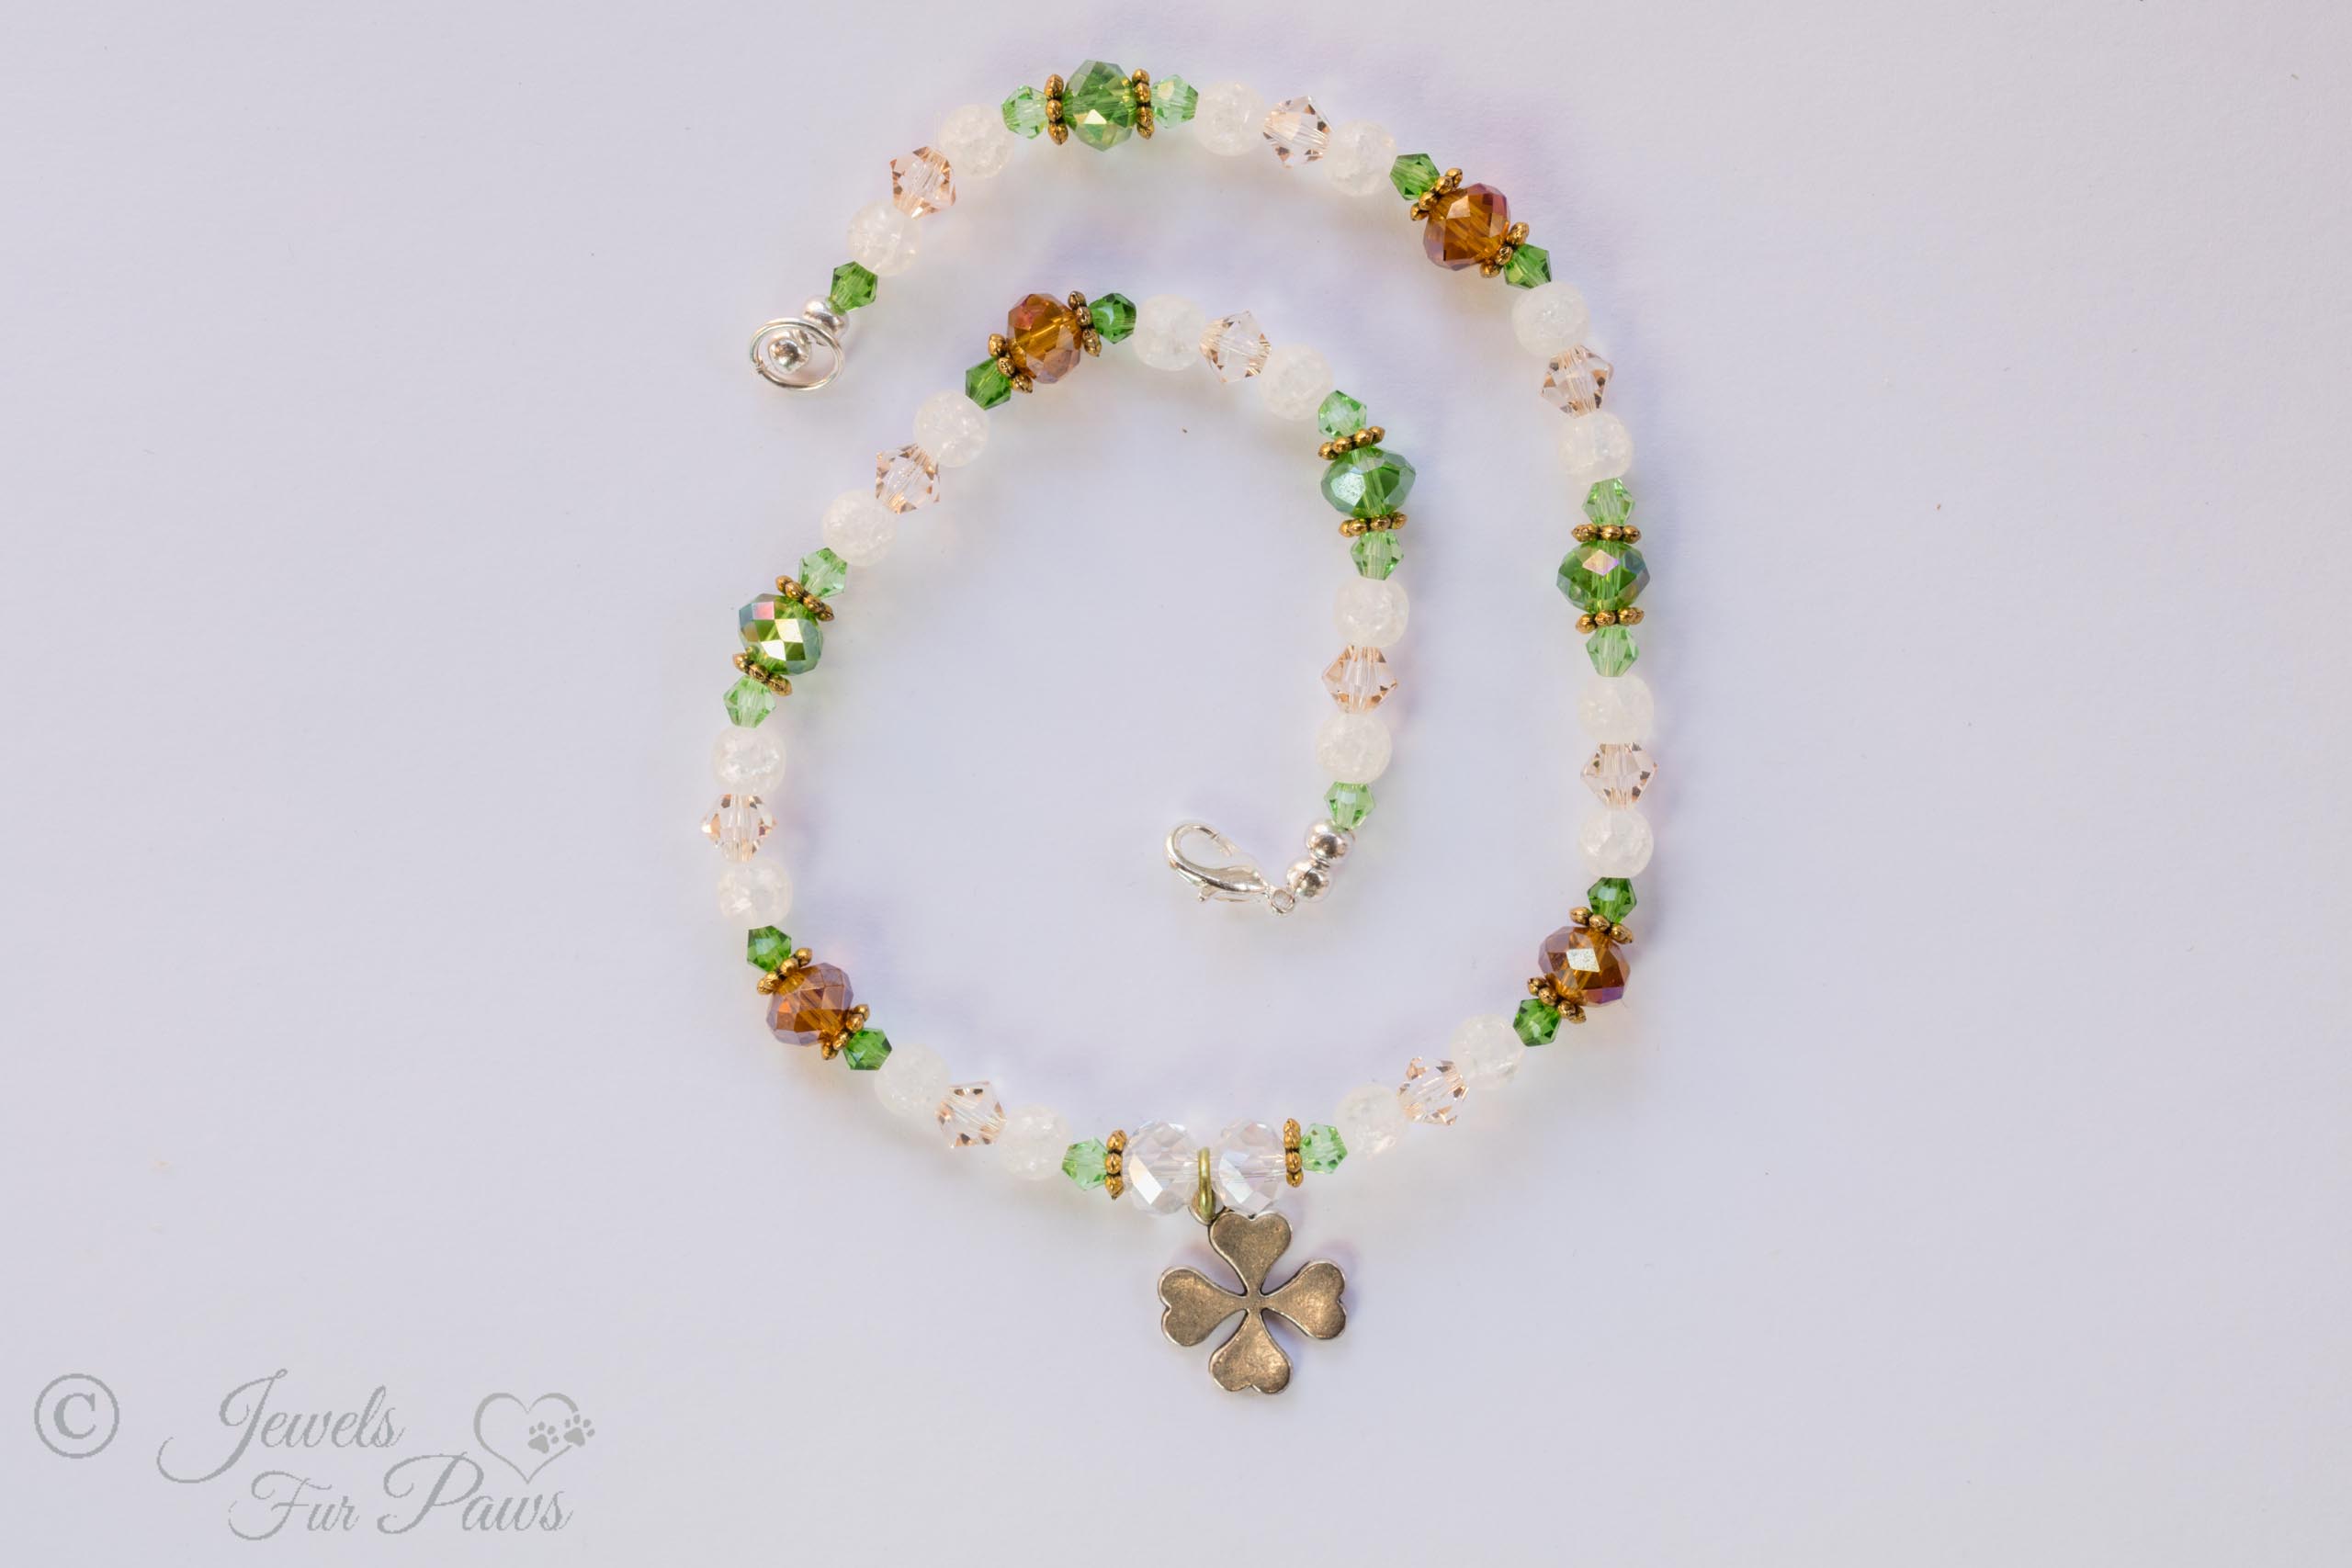 dog cat pet necklace green, white and amber beads with silver hanging lucky shamrock four leaf clover charm on white background